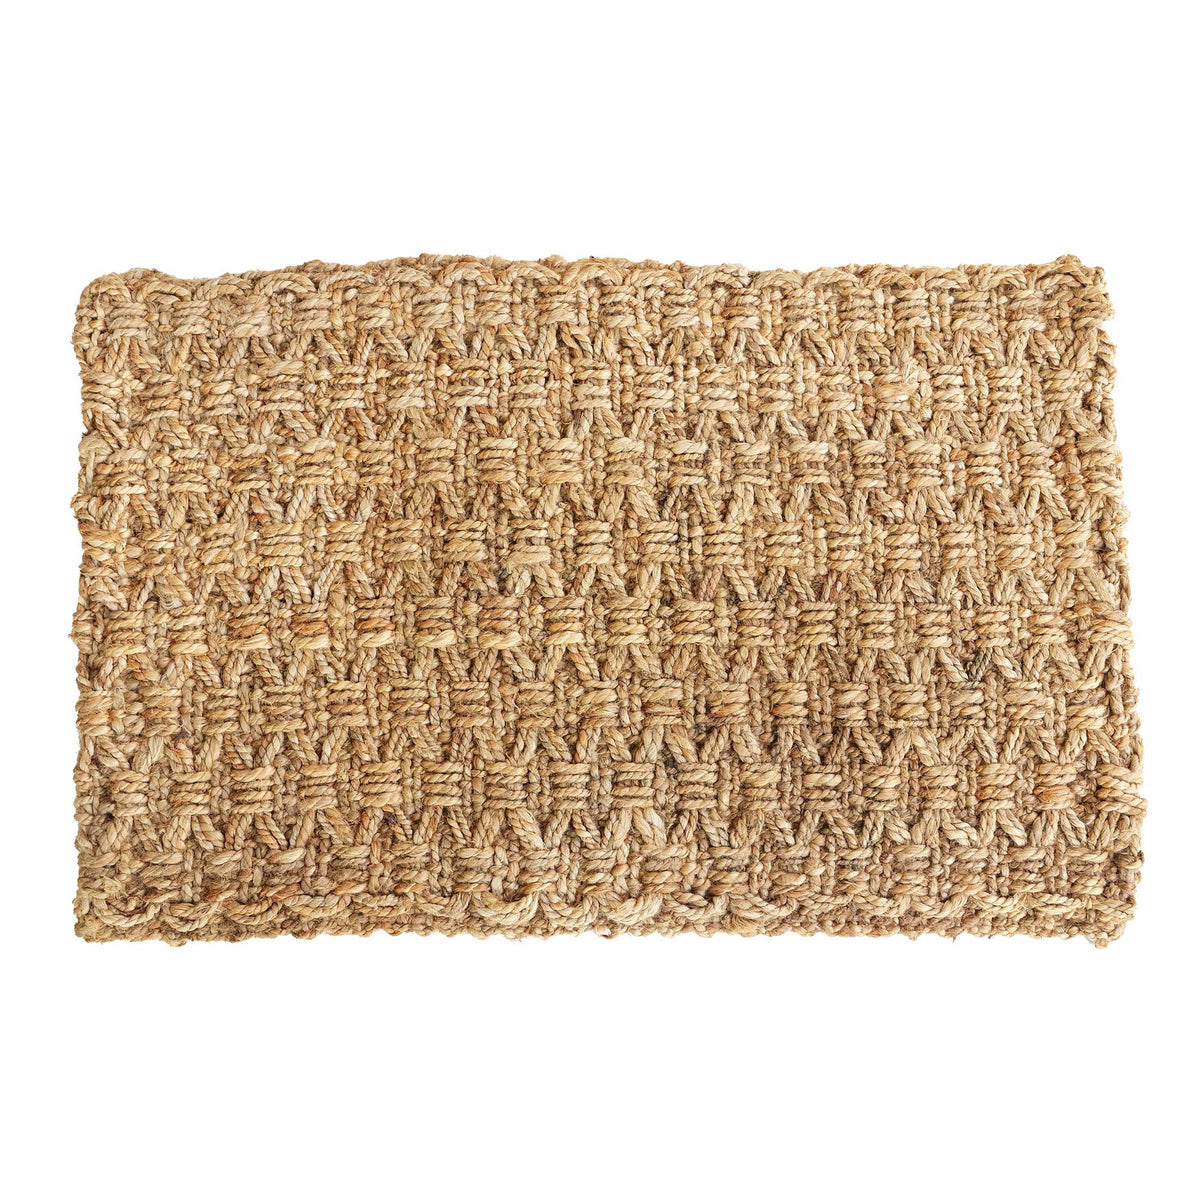 OnlyMat Knotted Luxe Mat - Braided and Knotted Mat - Hand Woven and Organic Braided Jute Mat